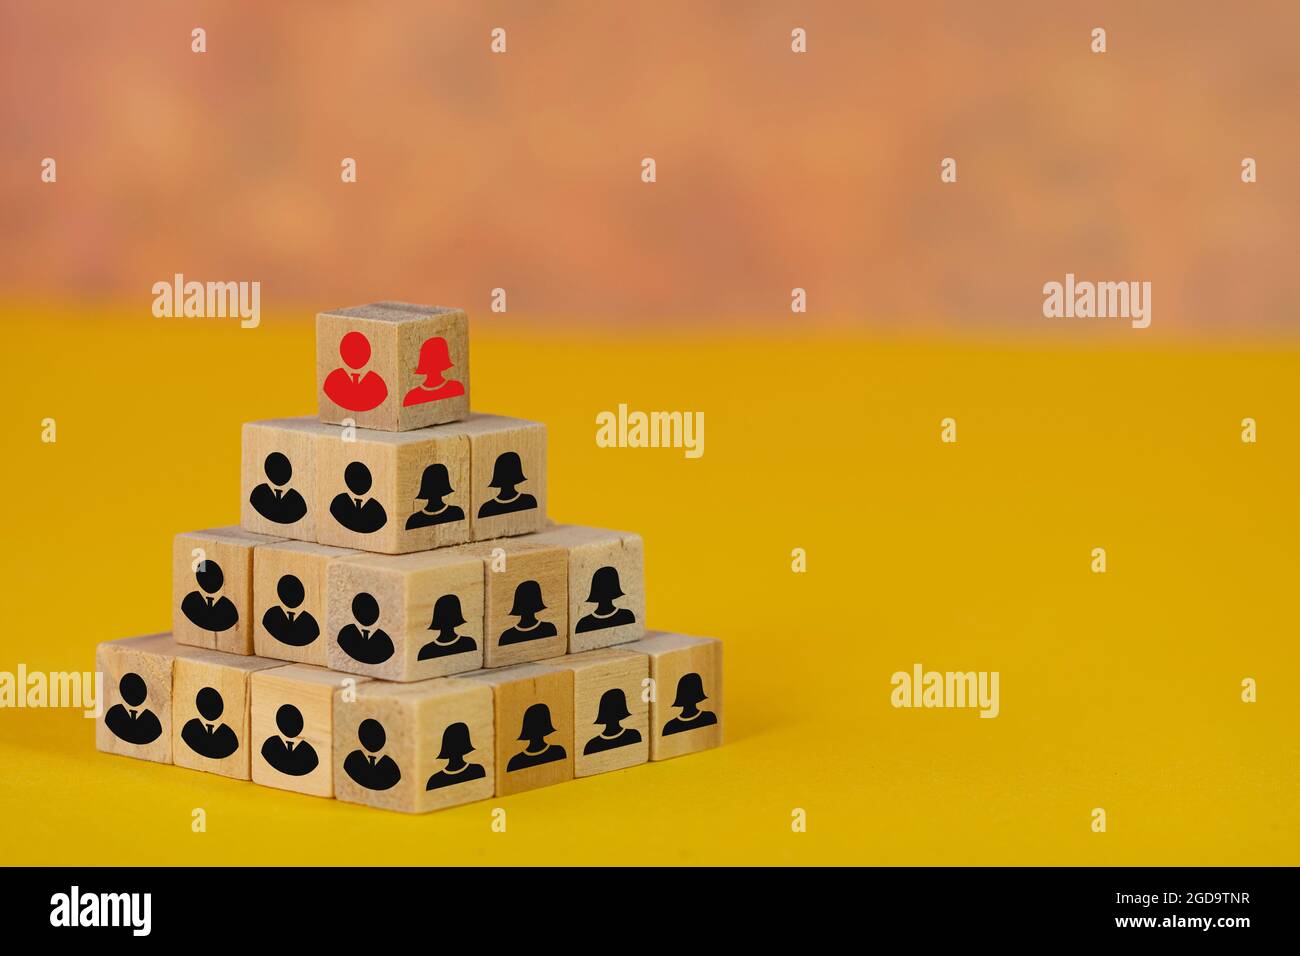 Business human resources concept. Pyramid of wooden blocks with man and woman icons. Stock Photo